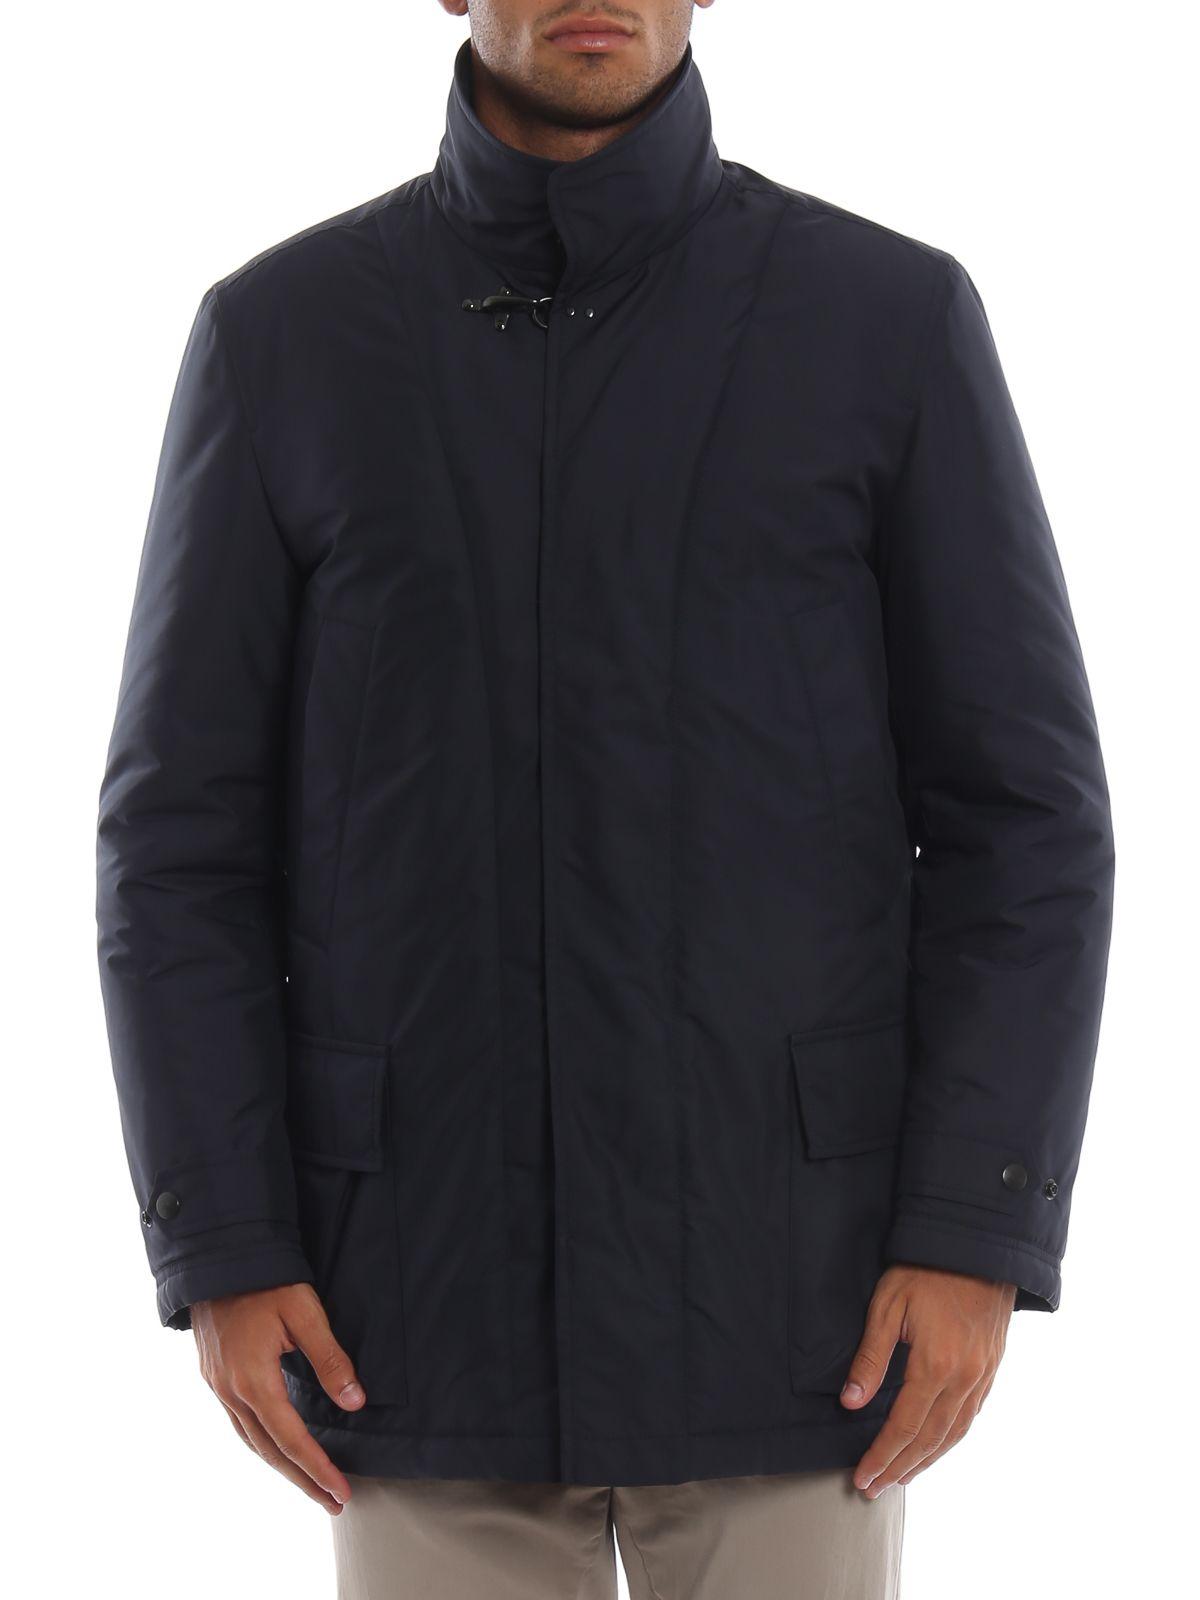 Fay Blue Polyester Outerwear Jacket in Blue for Men - Lyst